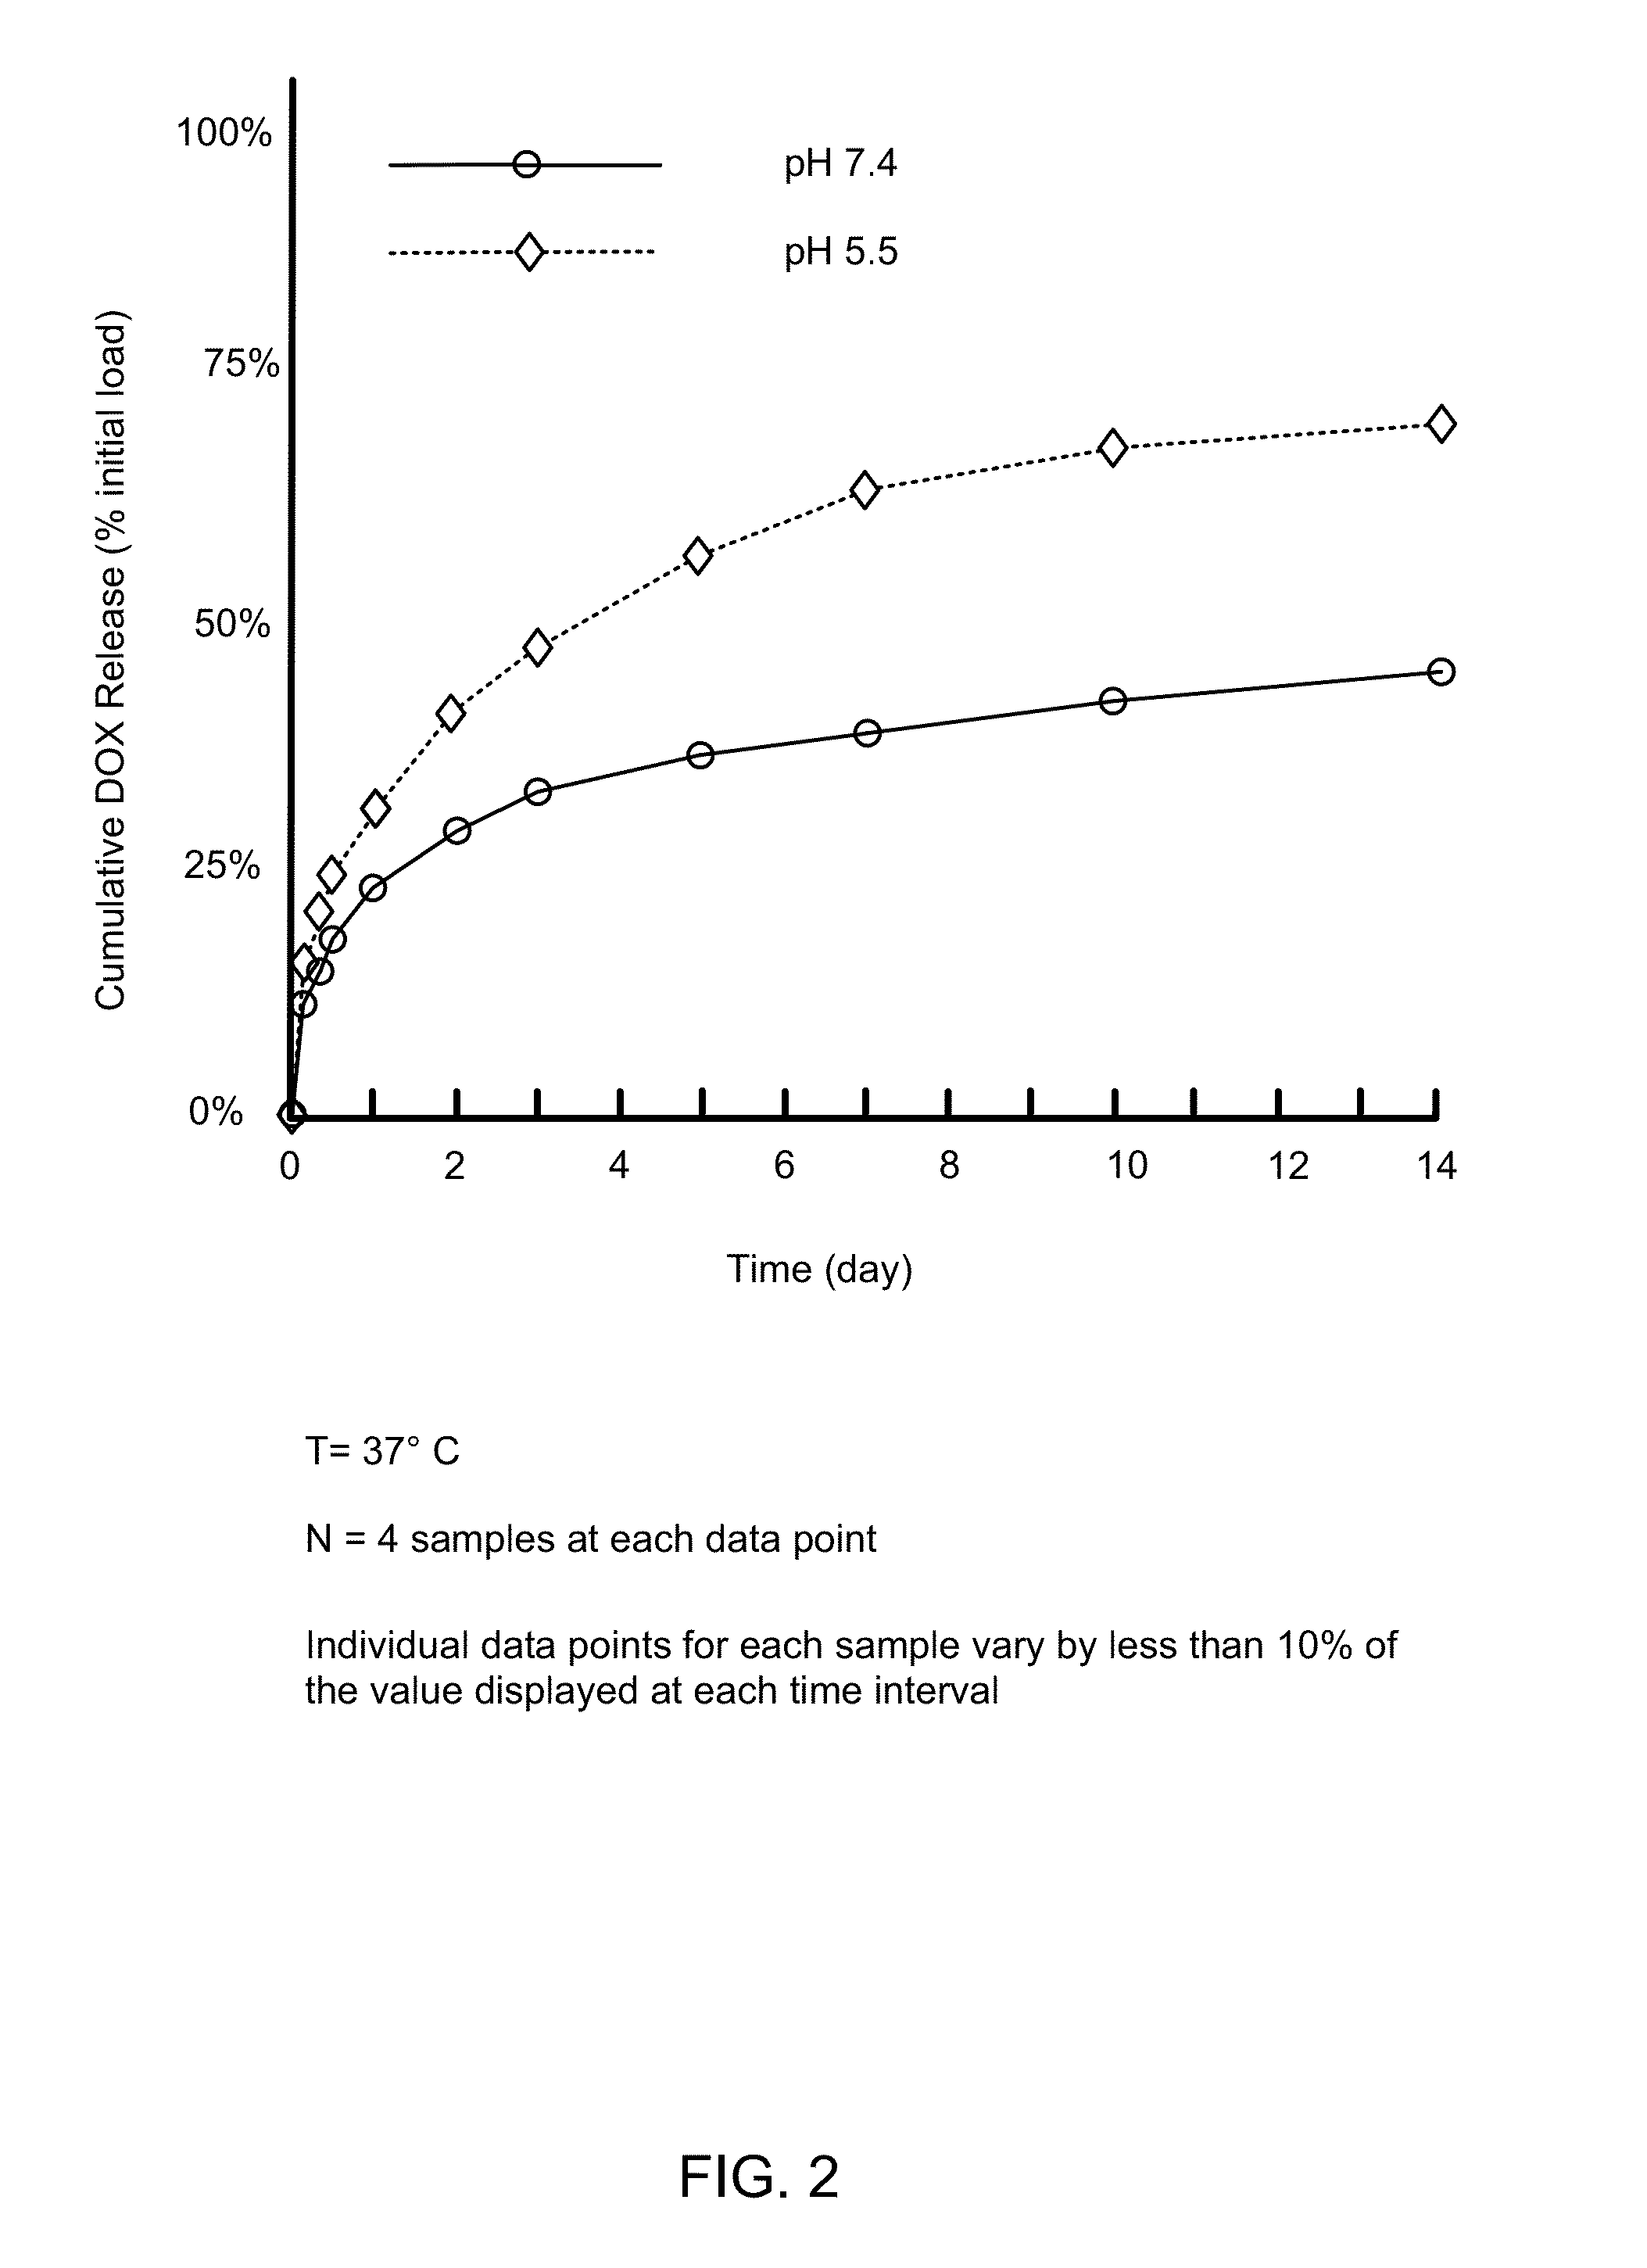 Biodegradable Nanoparticles as Novel Hemoglobin-Based Oxygen Carriers and Methods of Using the Same